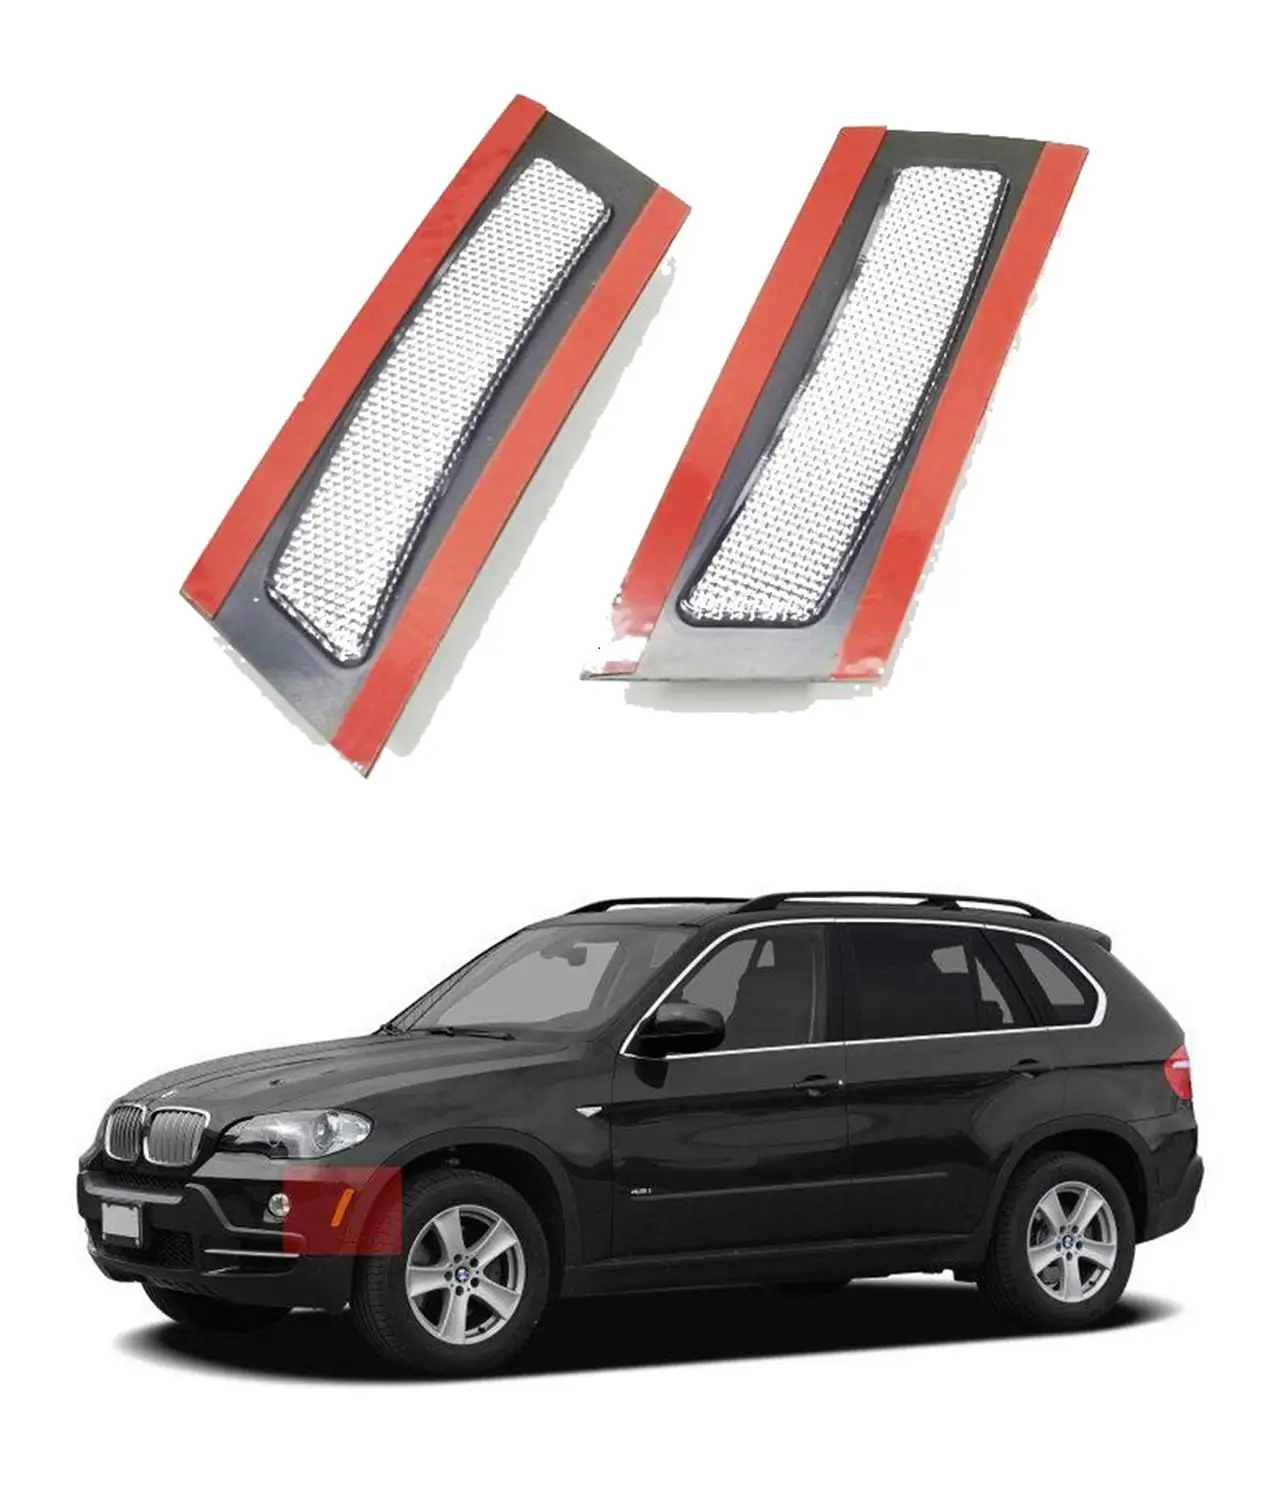 

Clear/Smoke/Amberr/Dark Grey/Red Lens Front Bumper Side Marker Reflector Light for 2007-2010 BMW X5 E70 Pre-LCI free shipping